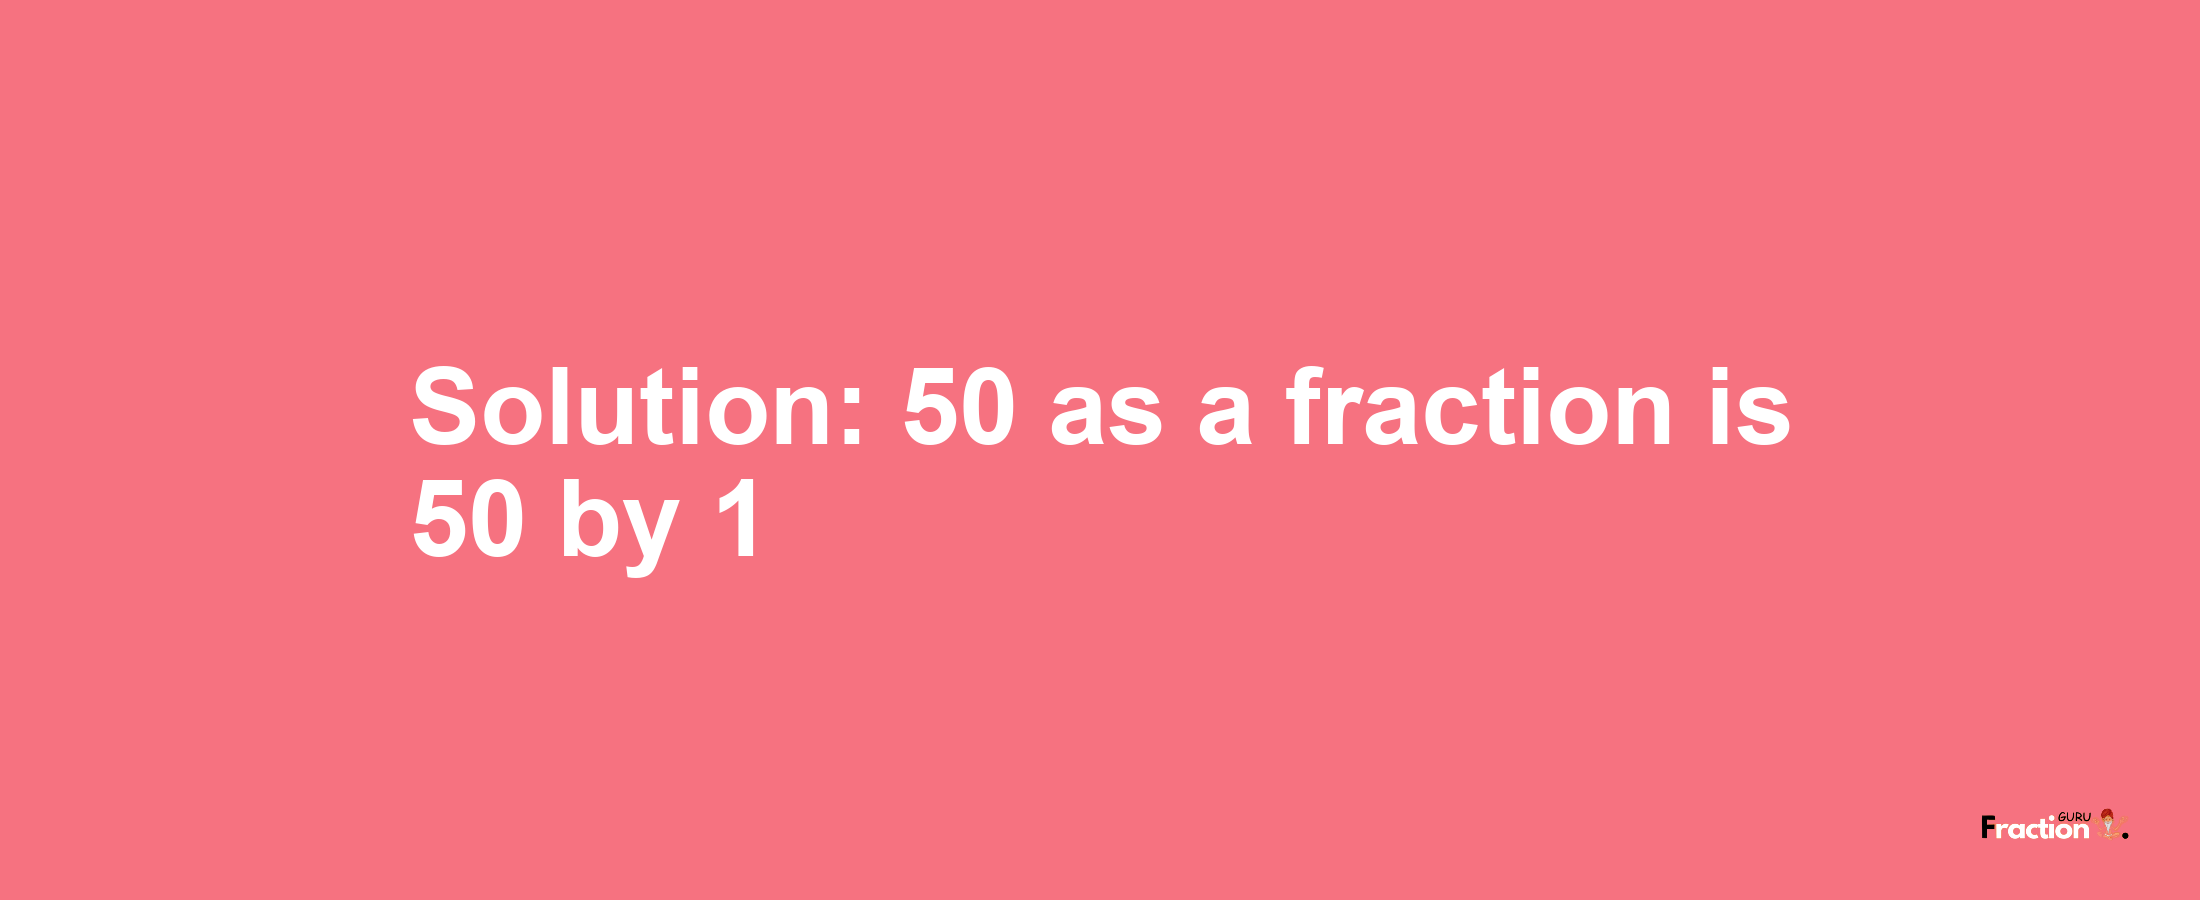 Solution:50 as a fraction is 50/1